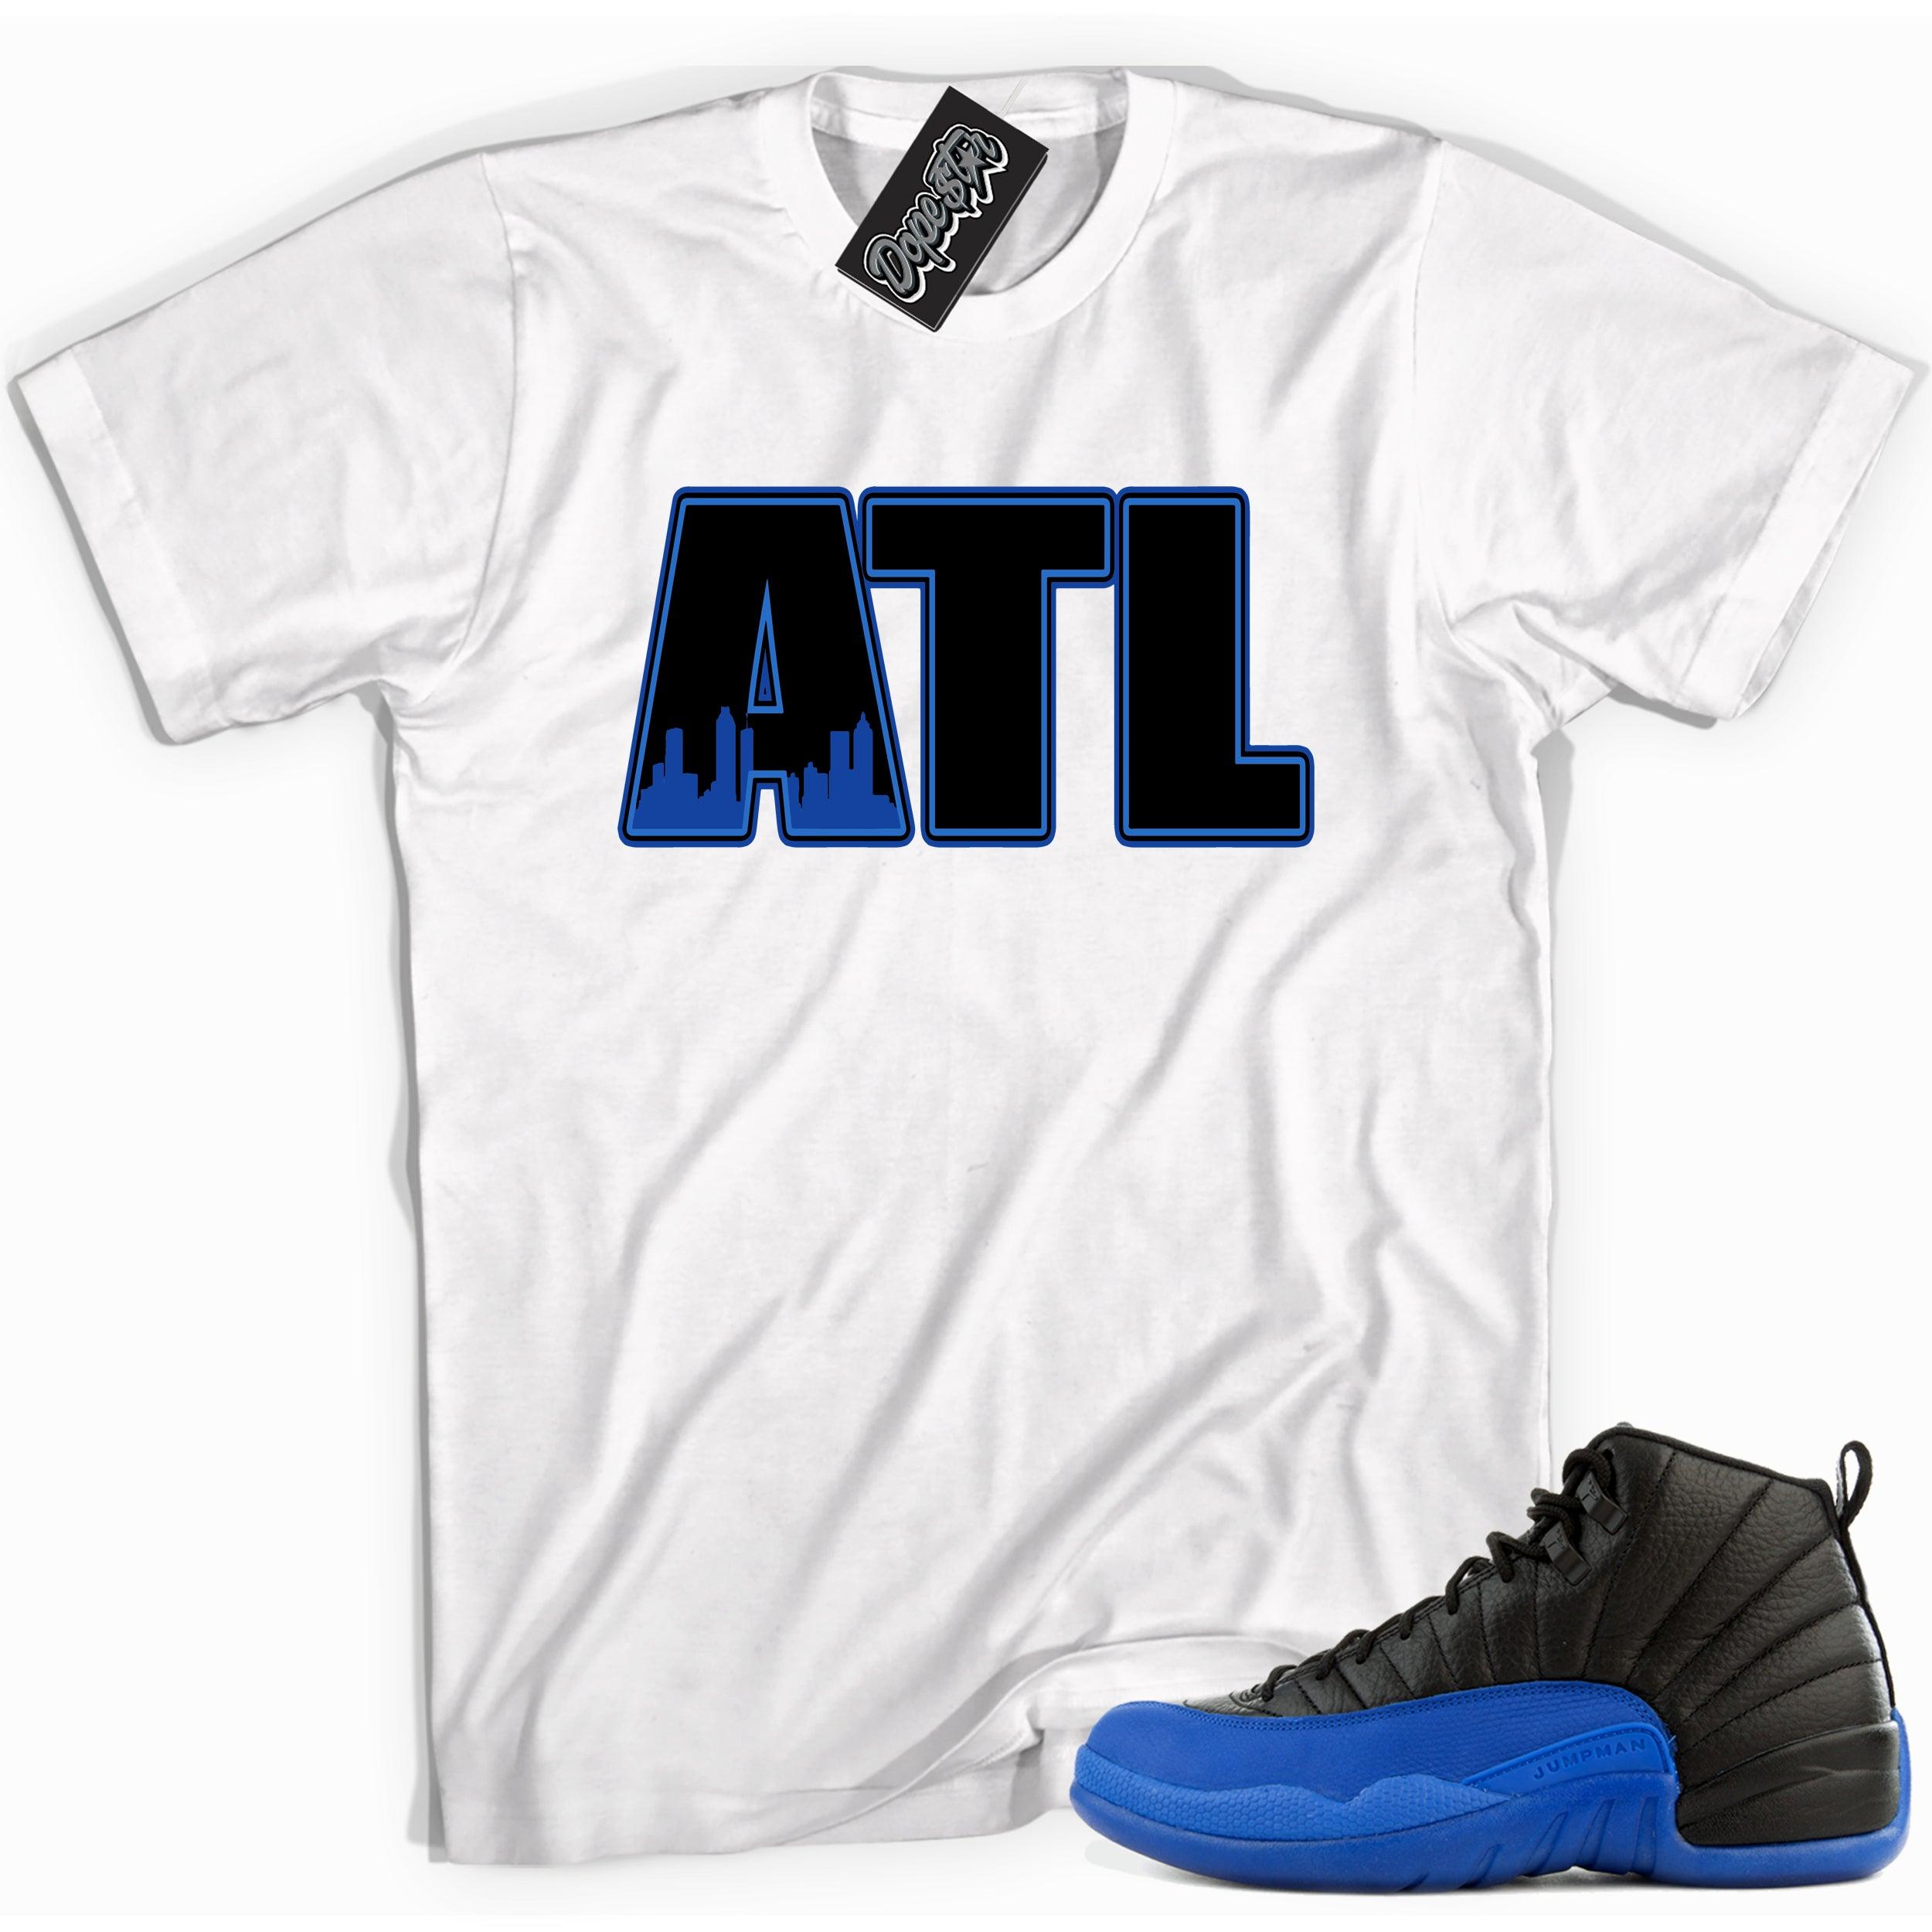 Cool white graphic tee with 'ATL' print, that perfectly matches Air Jordan 12 Retro Black Game Royal sneakers.